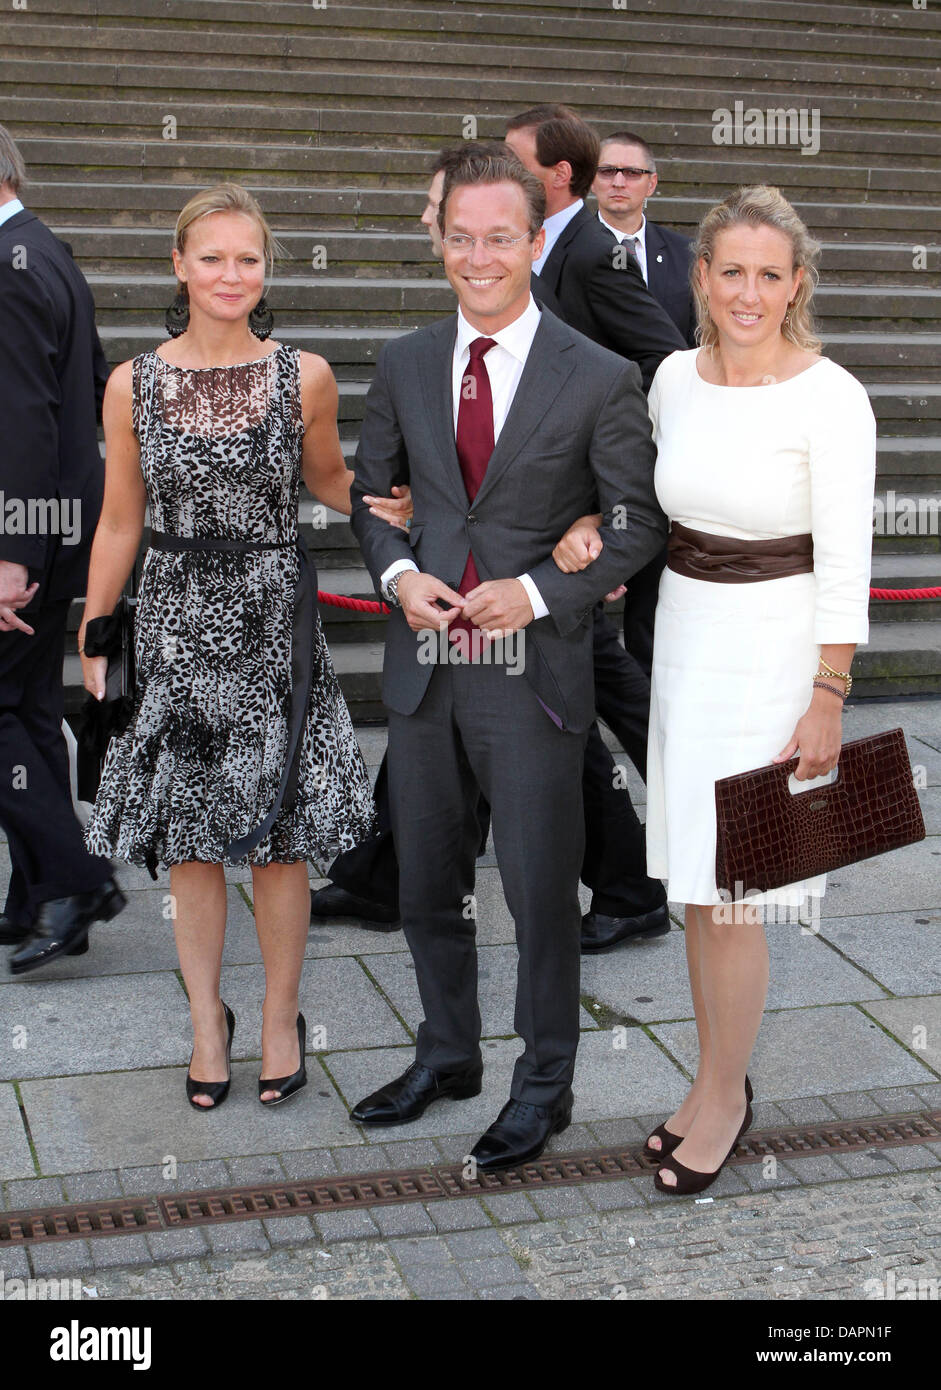 Princess Carolina (L) and Prince Jaime of Bourbon-Parma arrive for a benefit concert at the Konzerthaus in Berlin, Germany, 26 August 2011. The concert for the Princess Kira of Prussia Foundation took place on the occassion of the wedding Georg Friedrich, Prince of Prussia to Sophie, Princess of Isenburg in Potsdam on 27 August 2011. Photo: Britta Pedersen Stock Photo